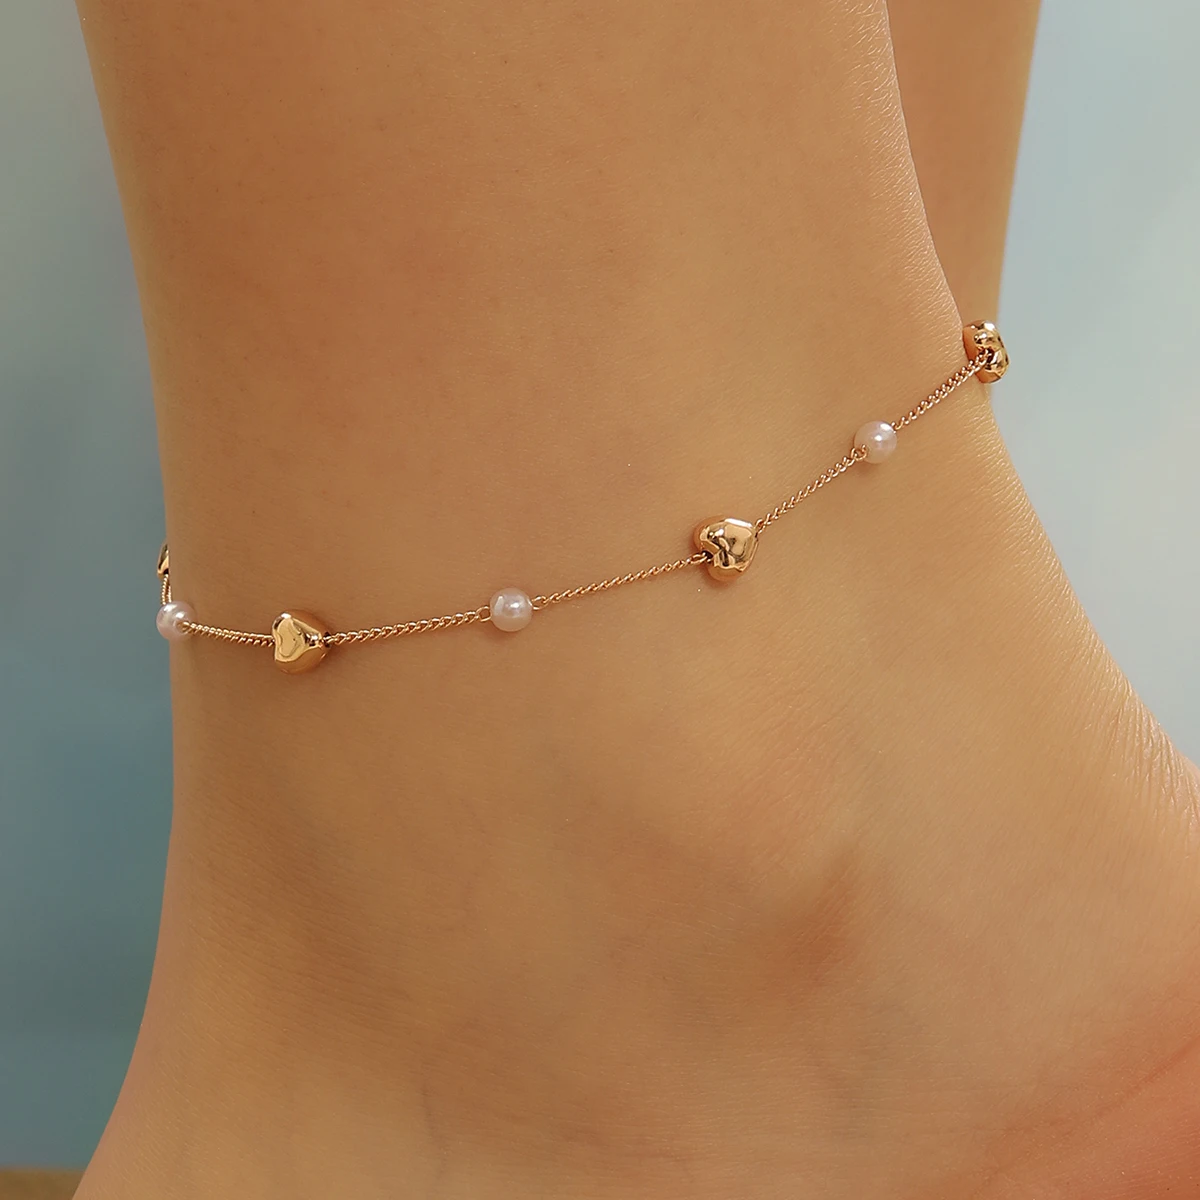 Vintage Heart Pearl Anklet Link Chains Bracelets for Women Girl Jewelry Barefoot Fashion Aesthetic Jewelry Female Birthday Gift